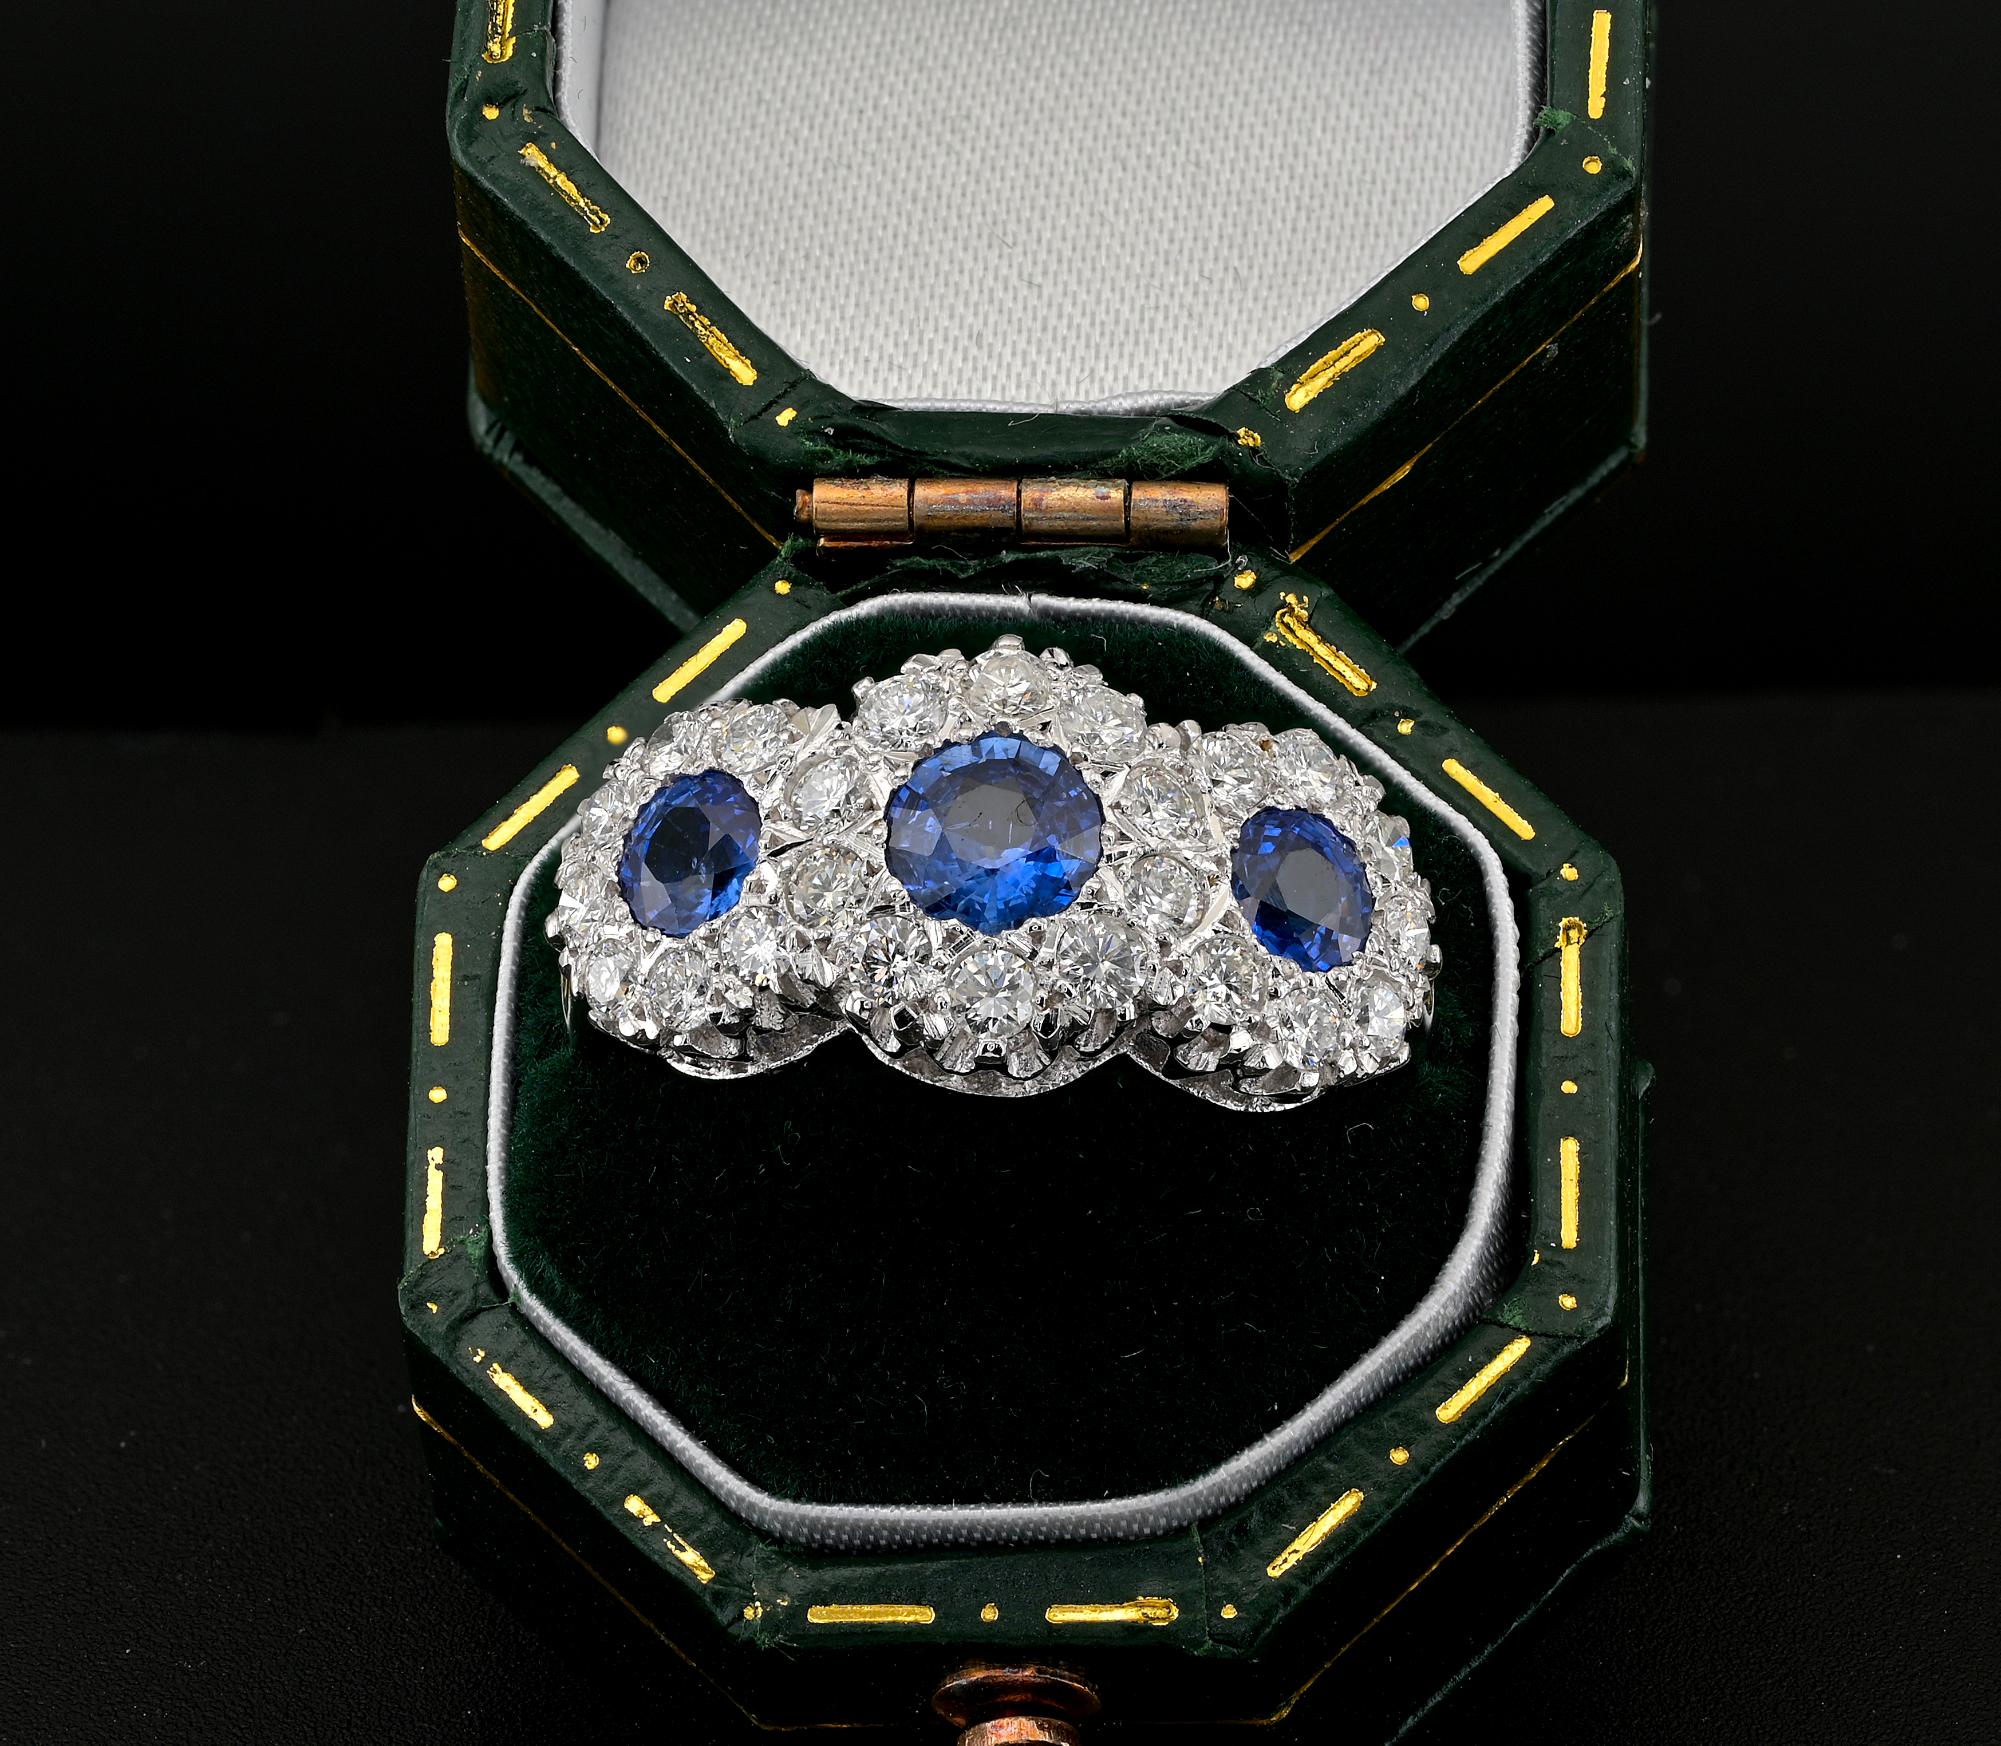 This very pretty Diamond & Sapphire ring is 1960 ca.
Hand fabricated mount of solid 18 Kt white gold
Gorgeously designed as a trio of clusters set with bright white Diamonds and intense cornflower colour Blue Sapphires
The centre piece is bigger